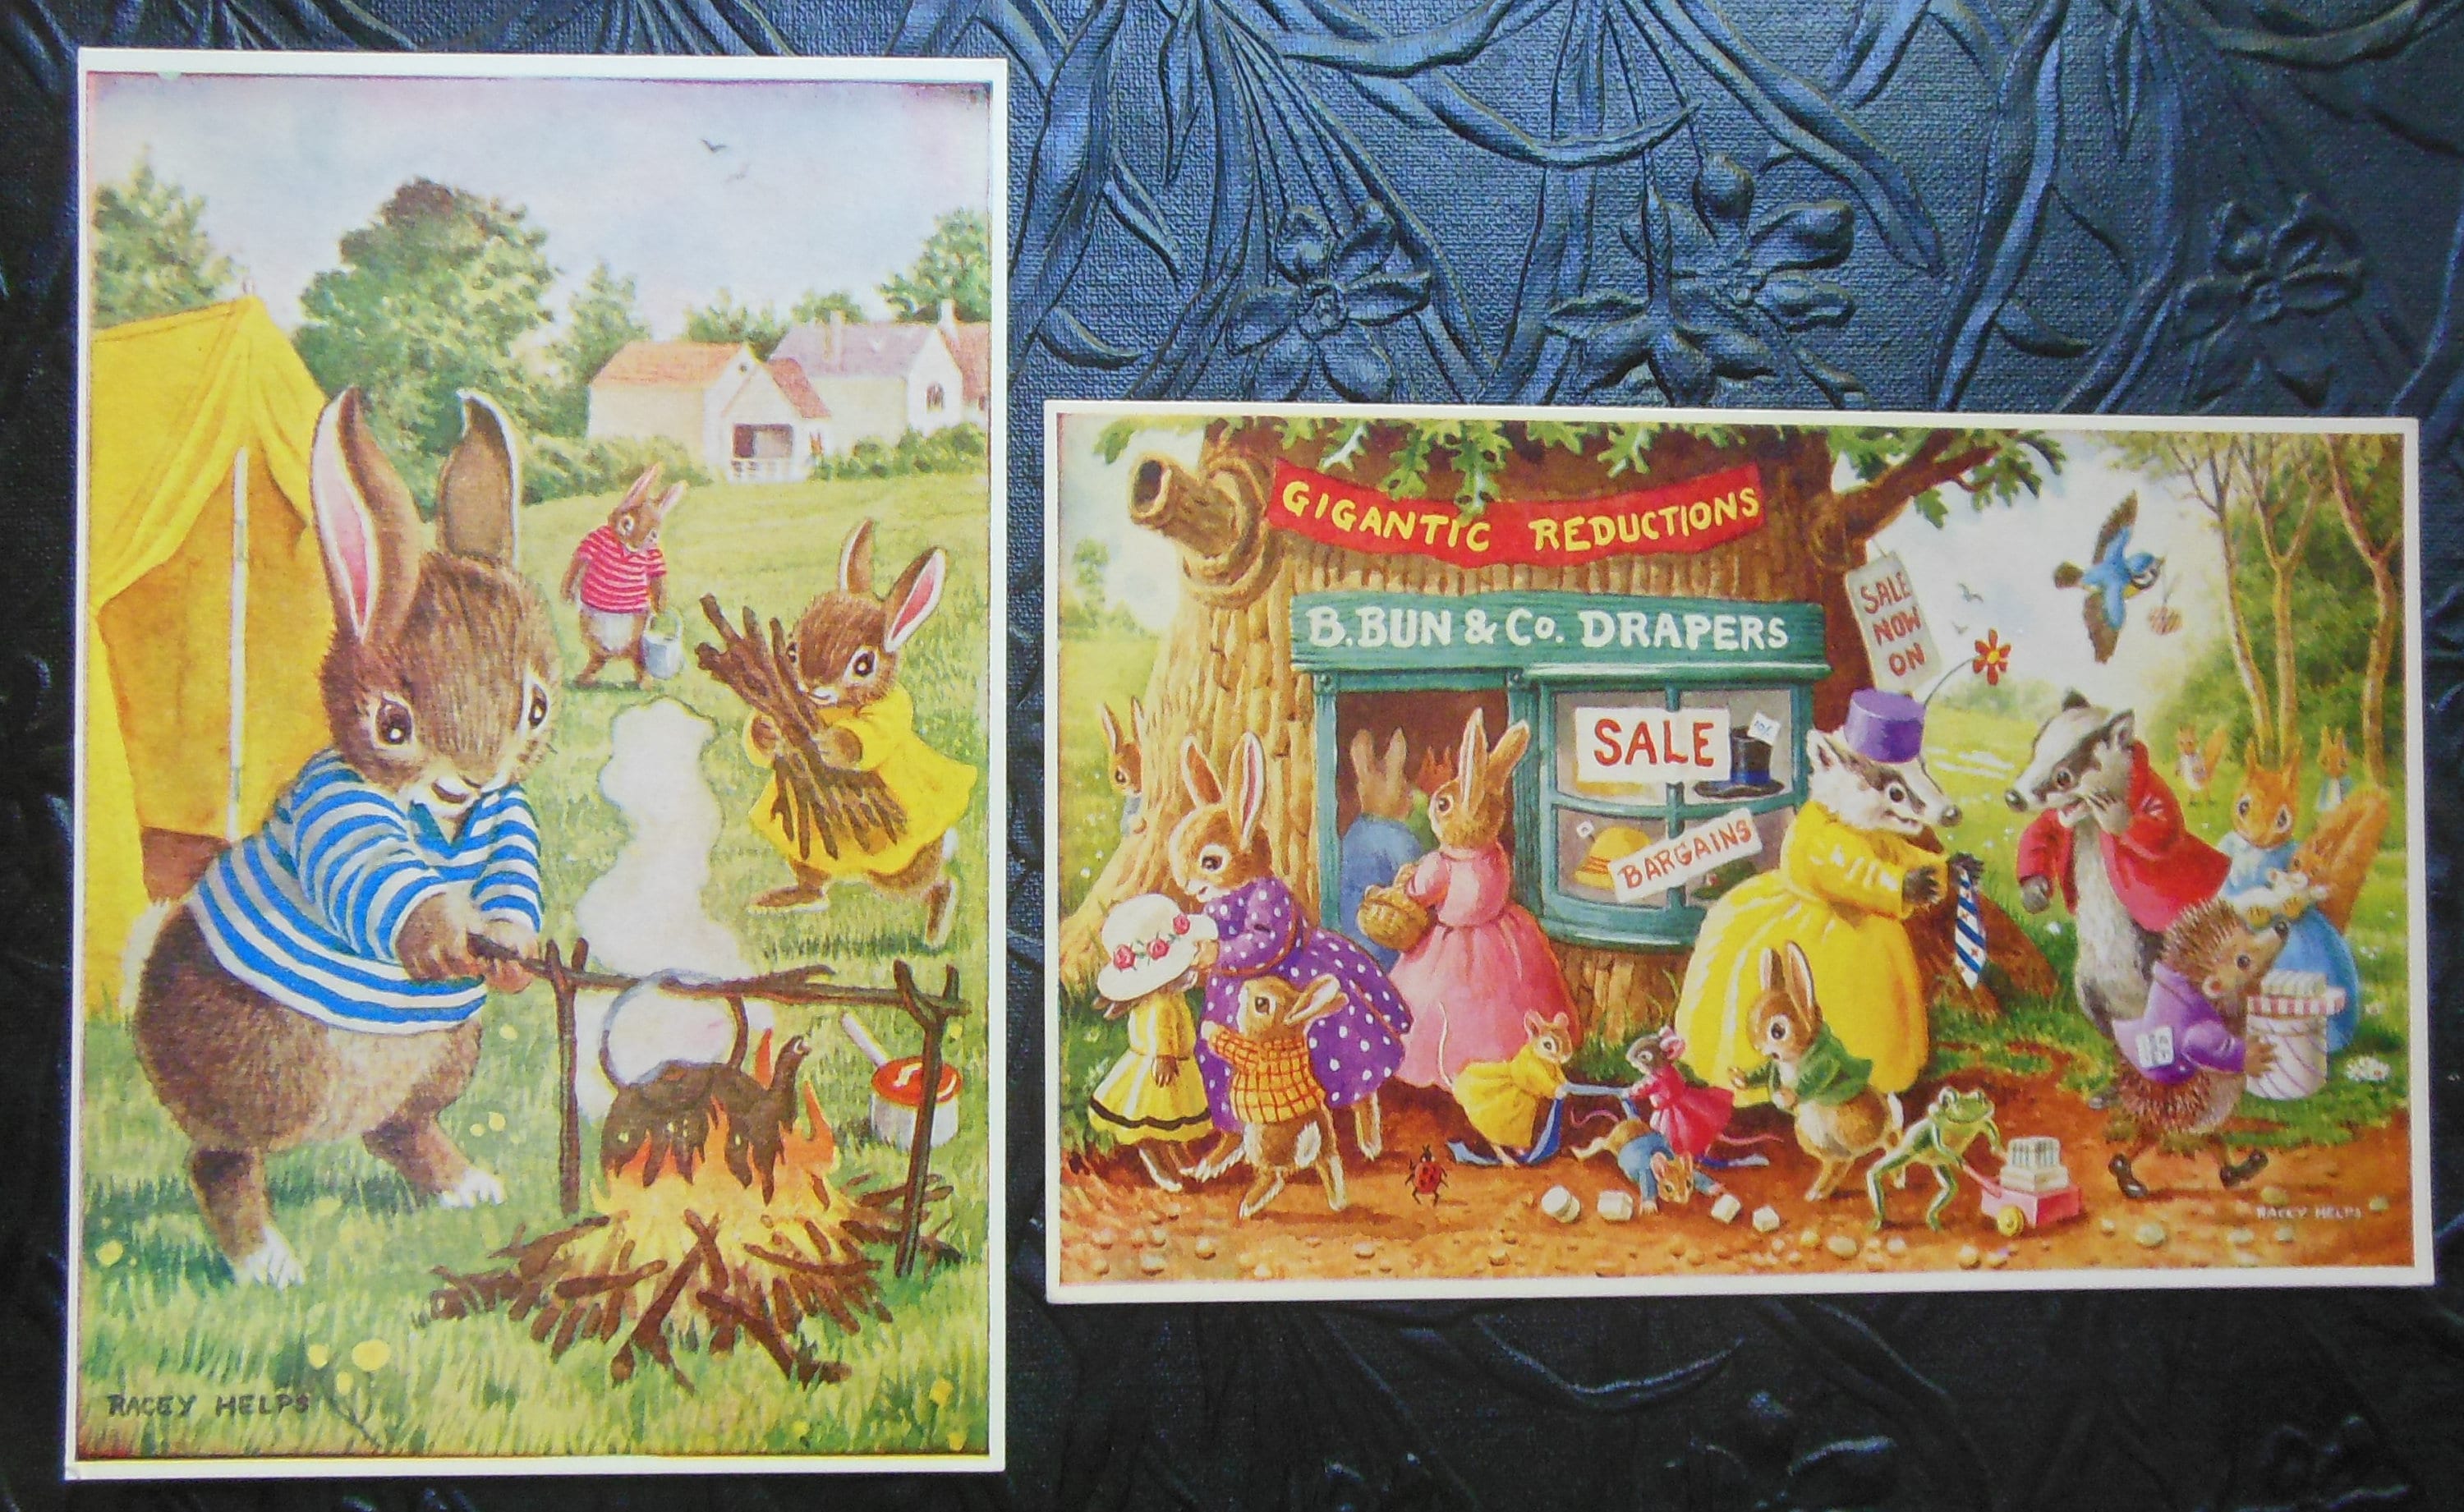 The Campers-Bunnies Build Fire & The Sale-Dressed Mice Rabbits Badger-Artist Signed Racey Helps-2 Vintage Unused Postcards